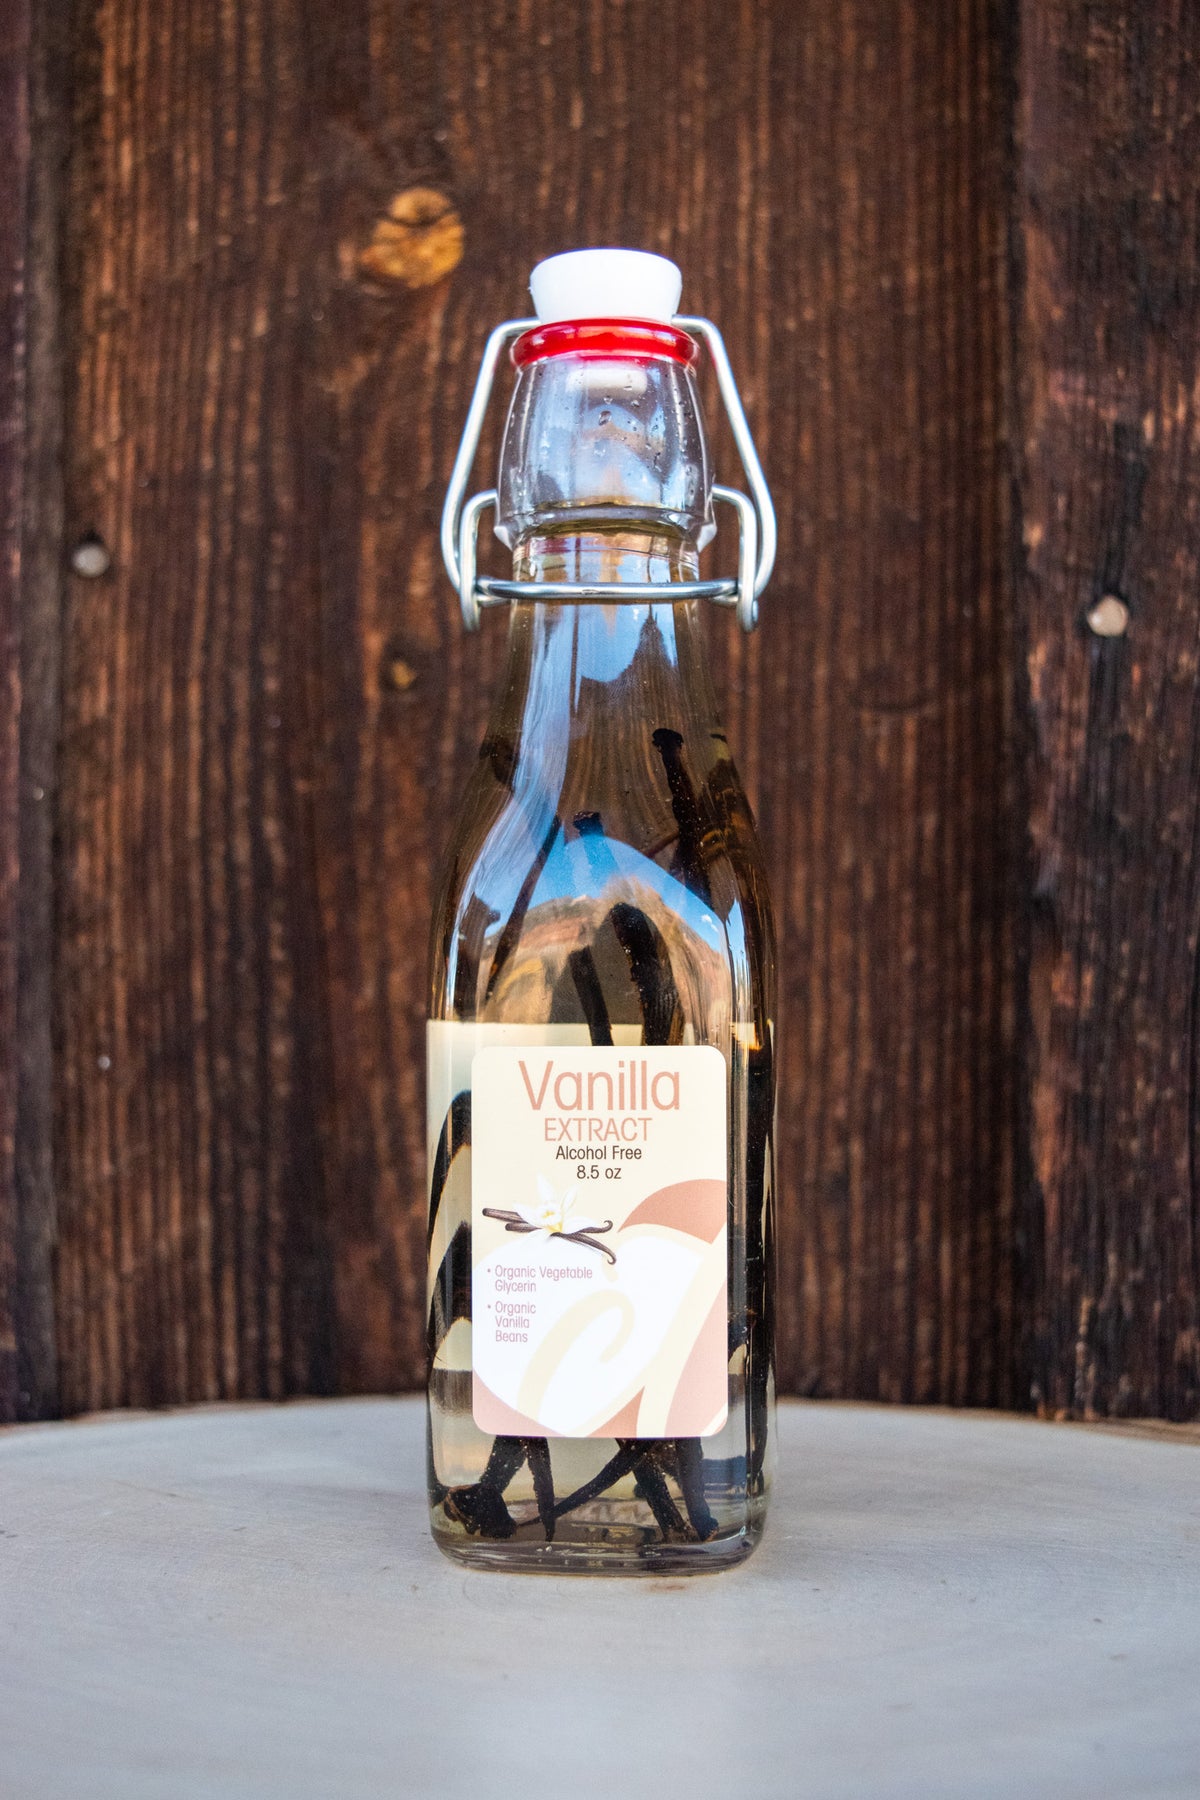 Double Strength Vanilla Extract - Alcohol Free - 8.5 oz (Vanilla Beans Included)